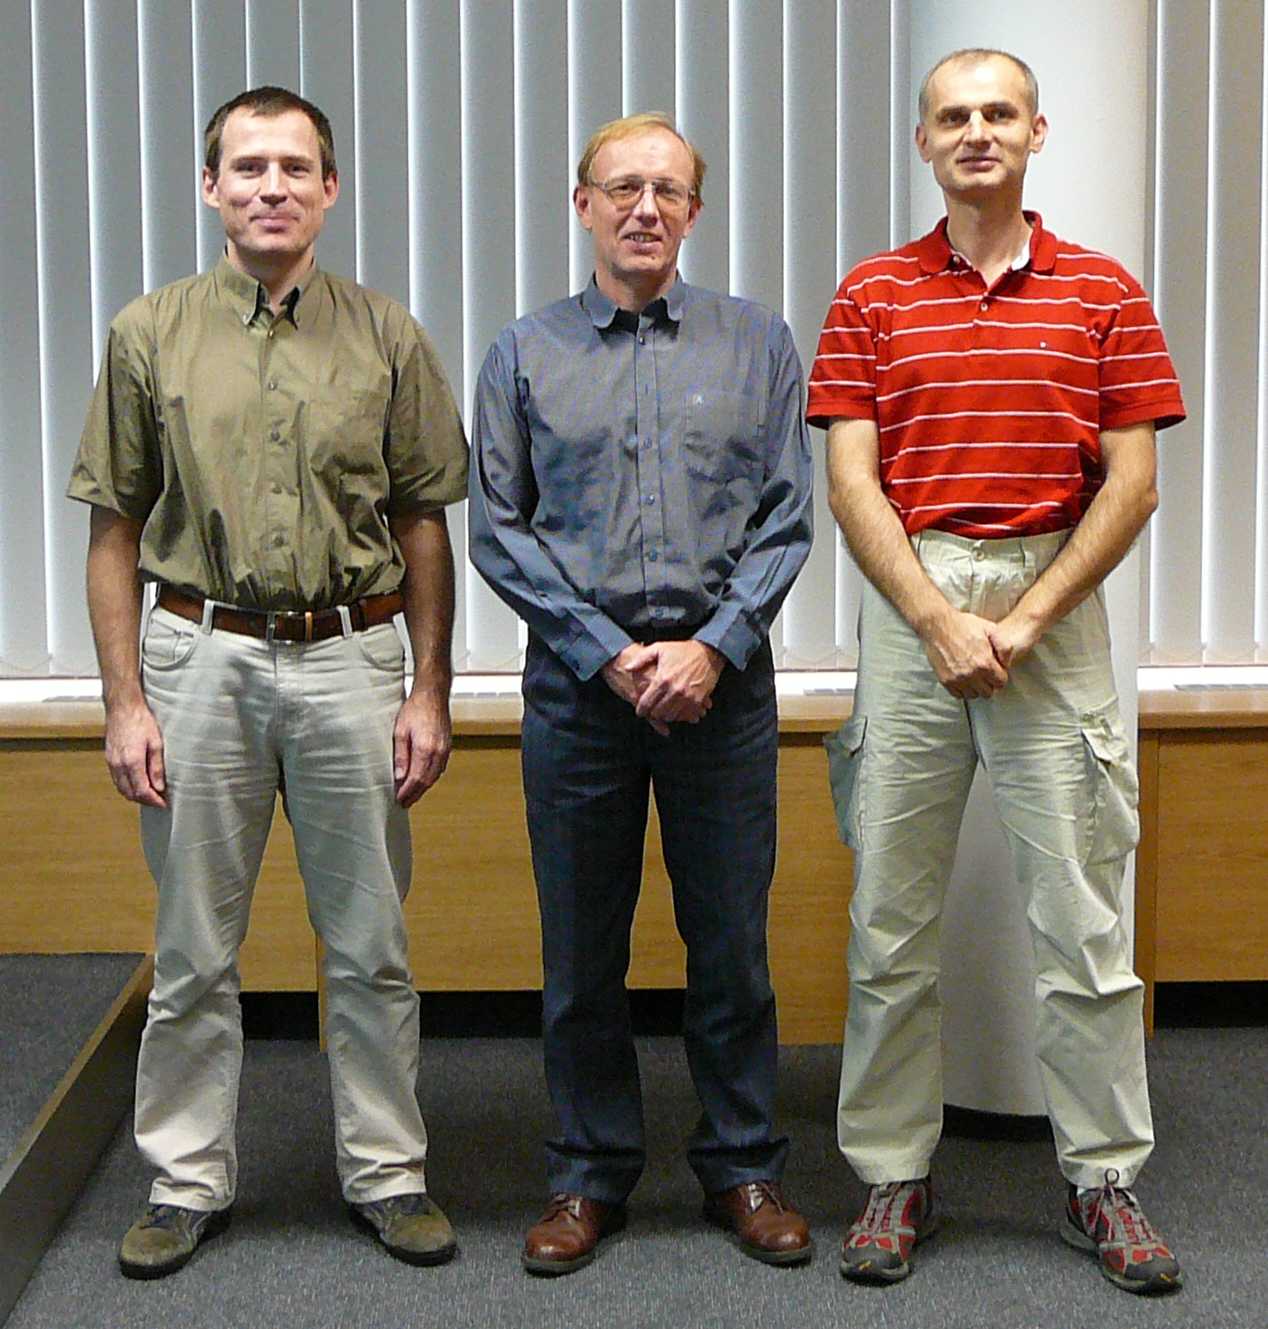 Picture of the leaders of Czech speech groups (from the left): Honza Cernocky (BUT), Jan Nouza (TUL), Ludek Muller (UWB)